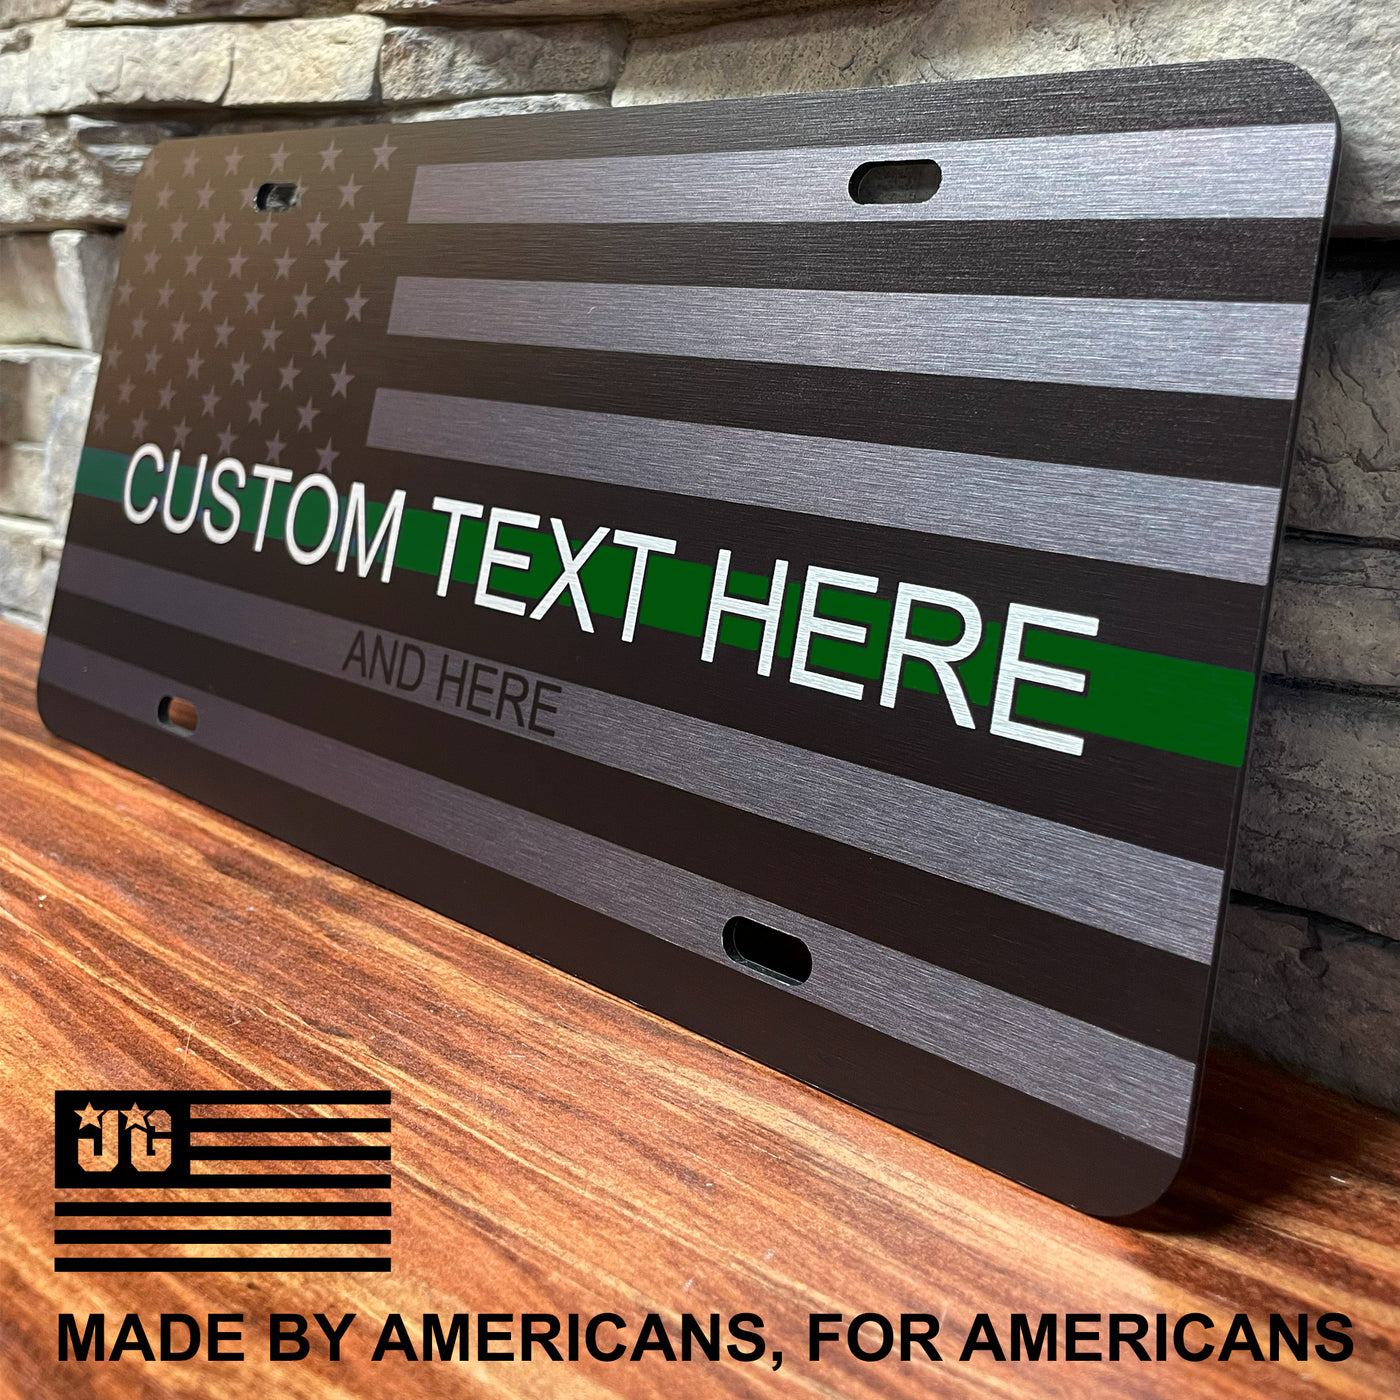 Personalized Tactical American Flag License Plate - Custom Made In the USA